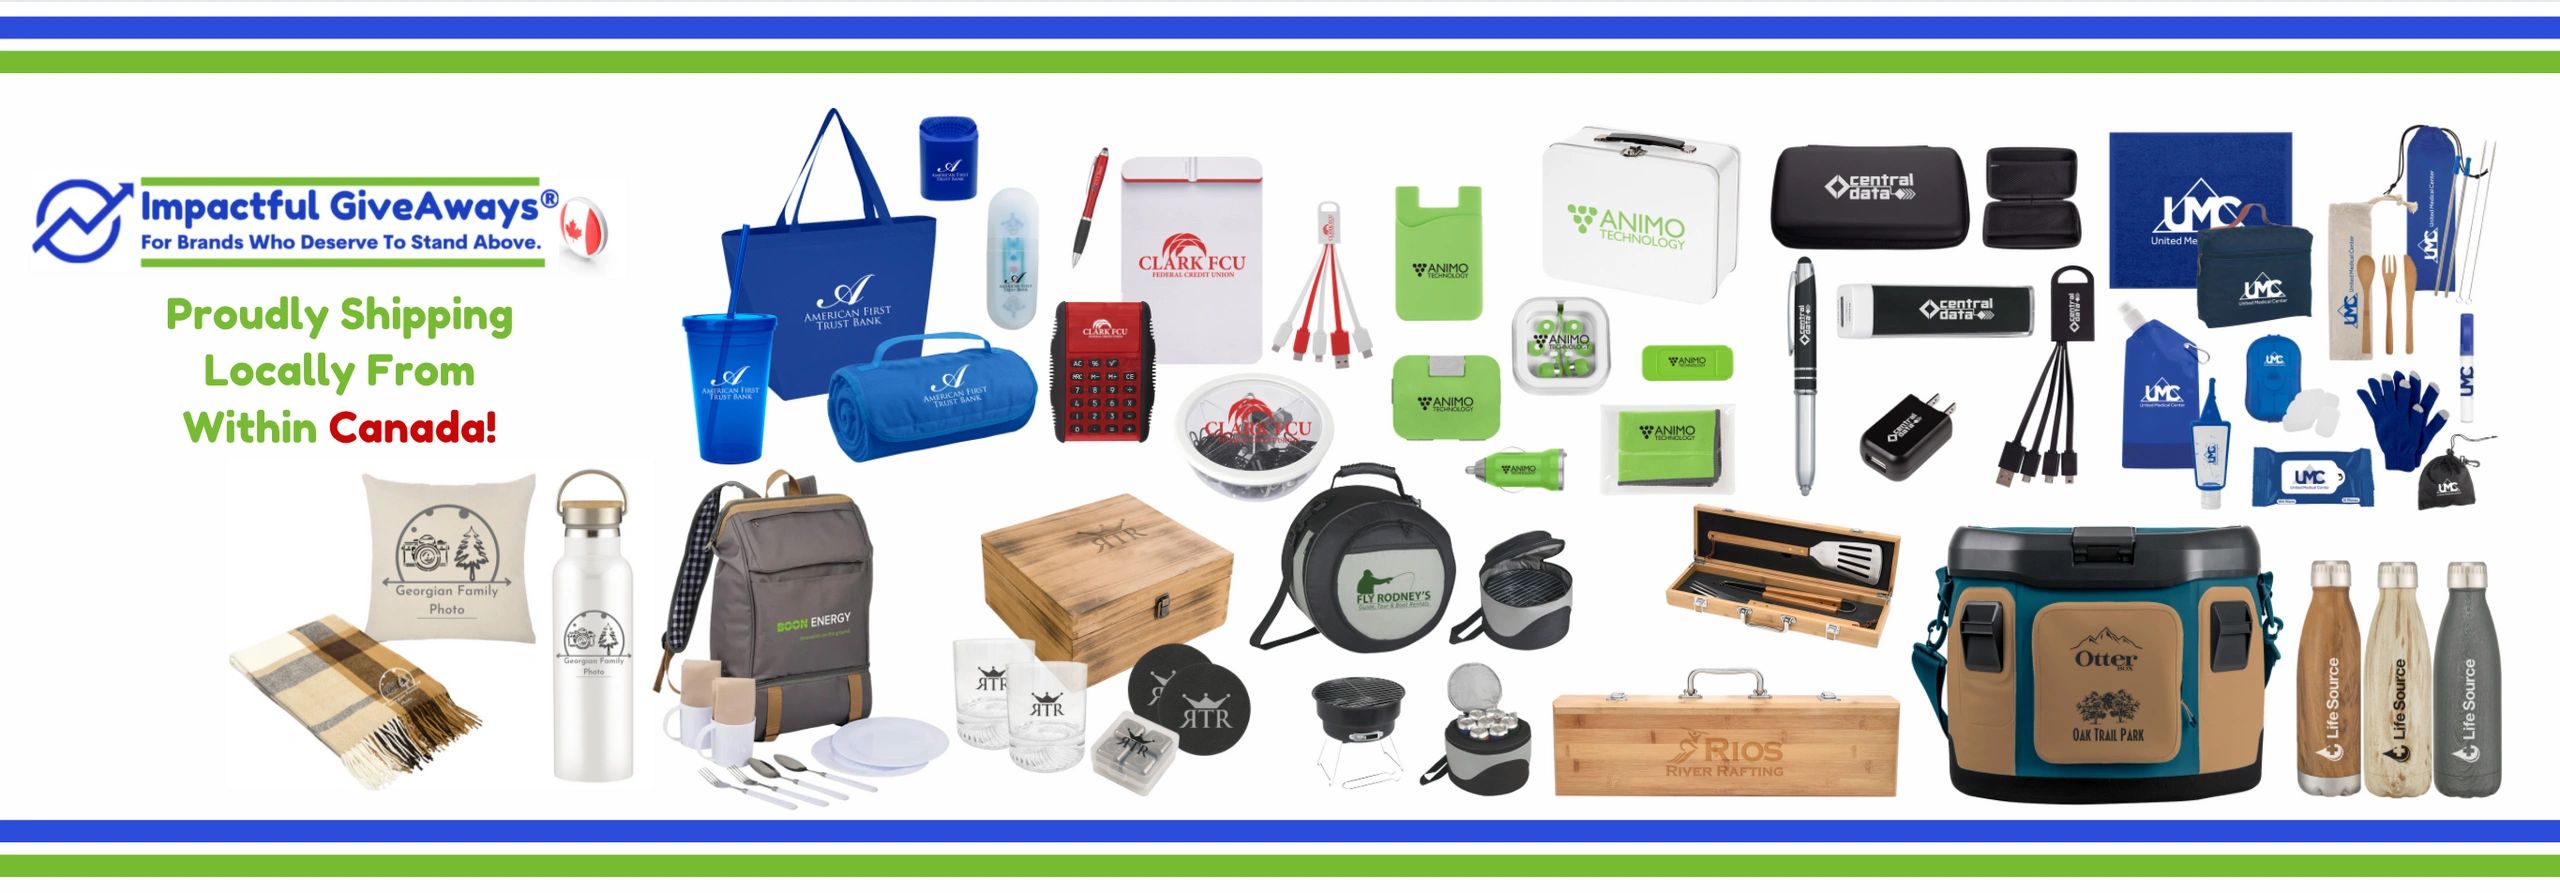 Selection of promotional products, corporate giveaways and custom branded promotional gifts.